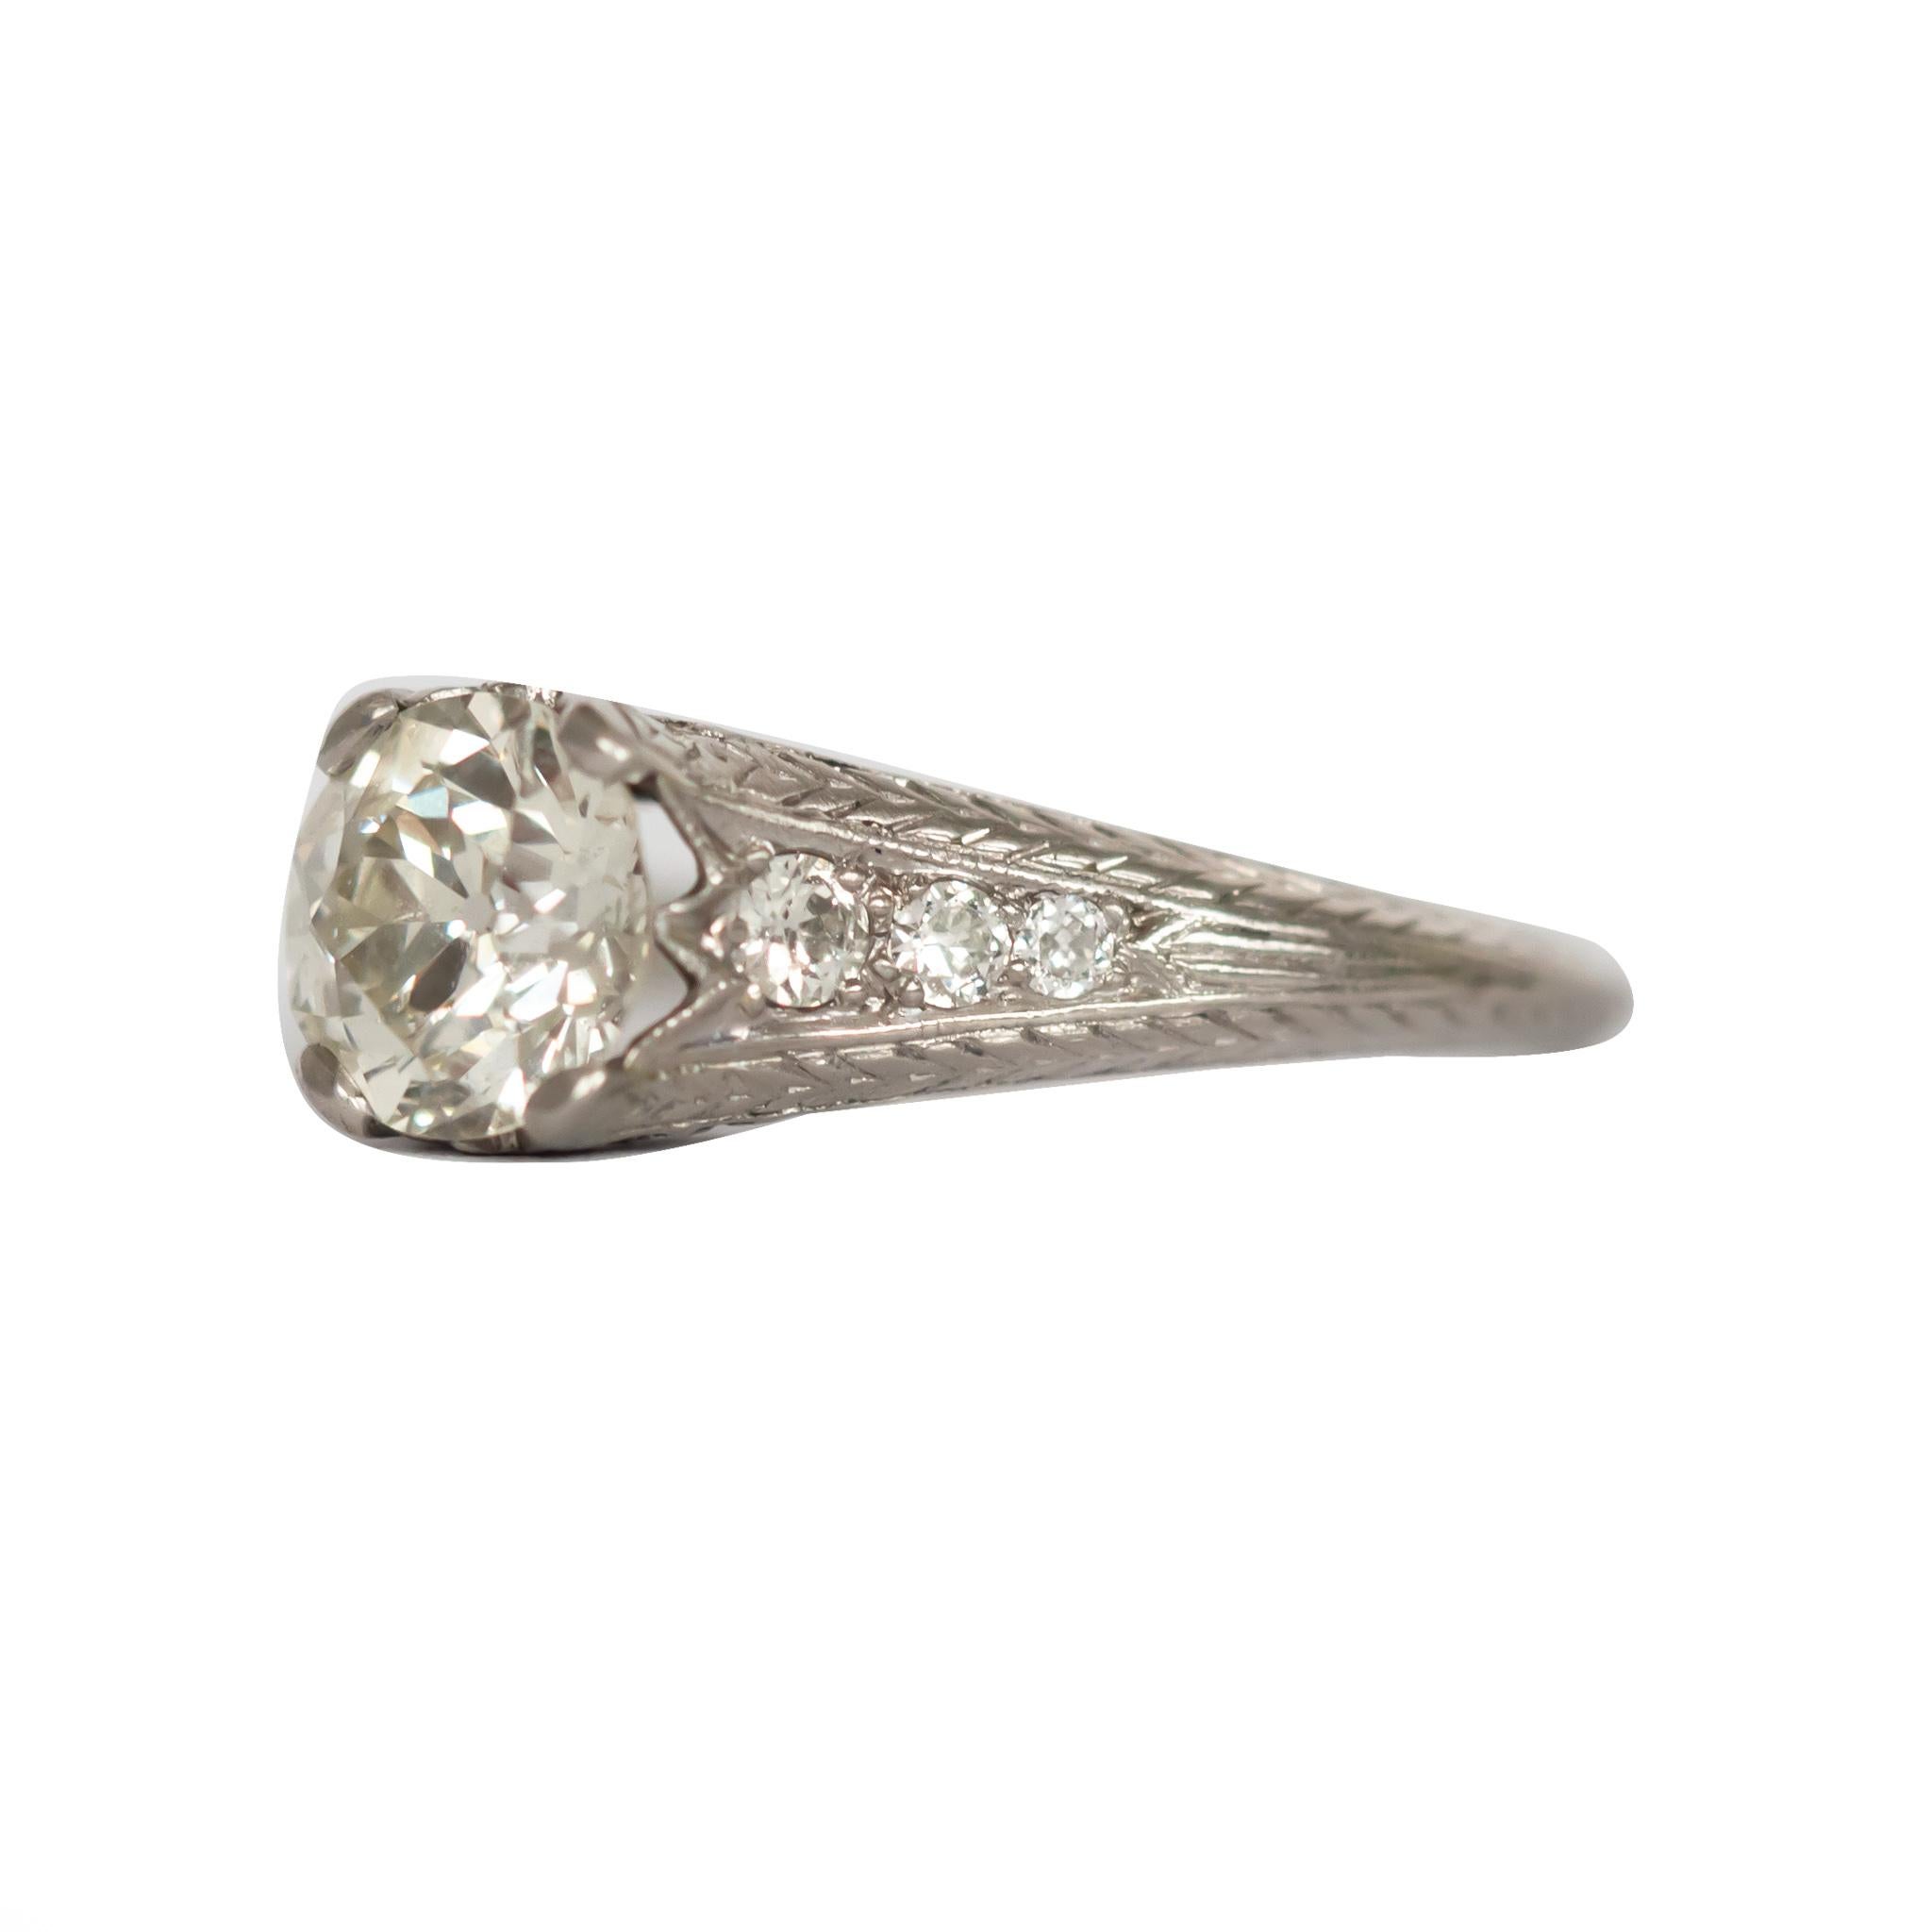 Ring Size: 7
Metal Type: Platinum [Hallmarked, and Tested]
Weight: 2.5 grams

Center Diamond Details:
Weight: 1.22 carat
Cut: Old European Brilliant
Color: K
Clarity: VS1

Side Diamond Details:
Weight: .15 carat, total weight
Cut: Old European